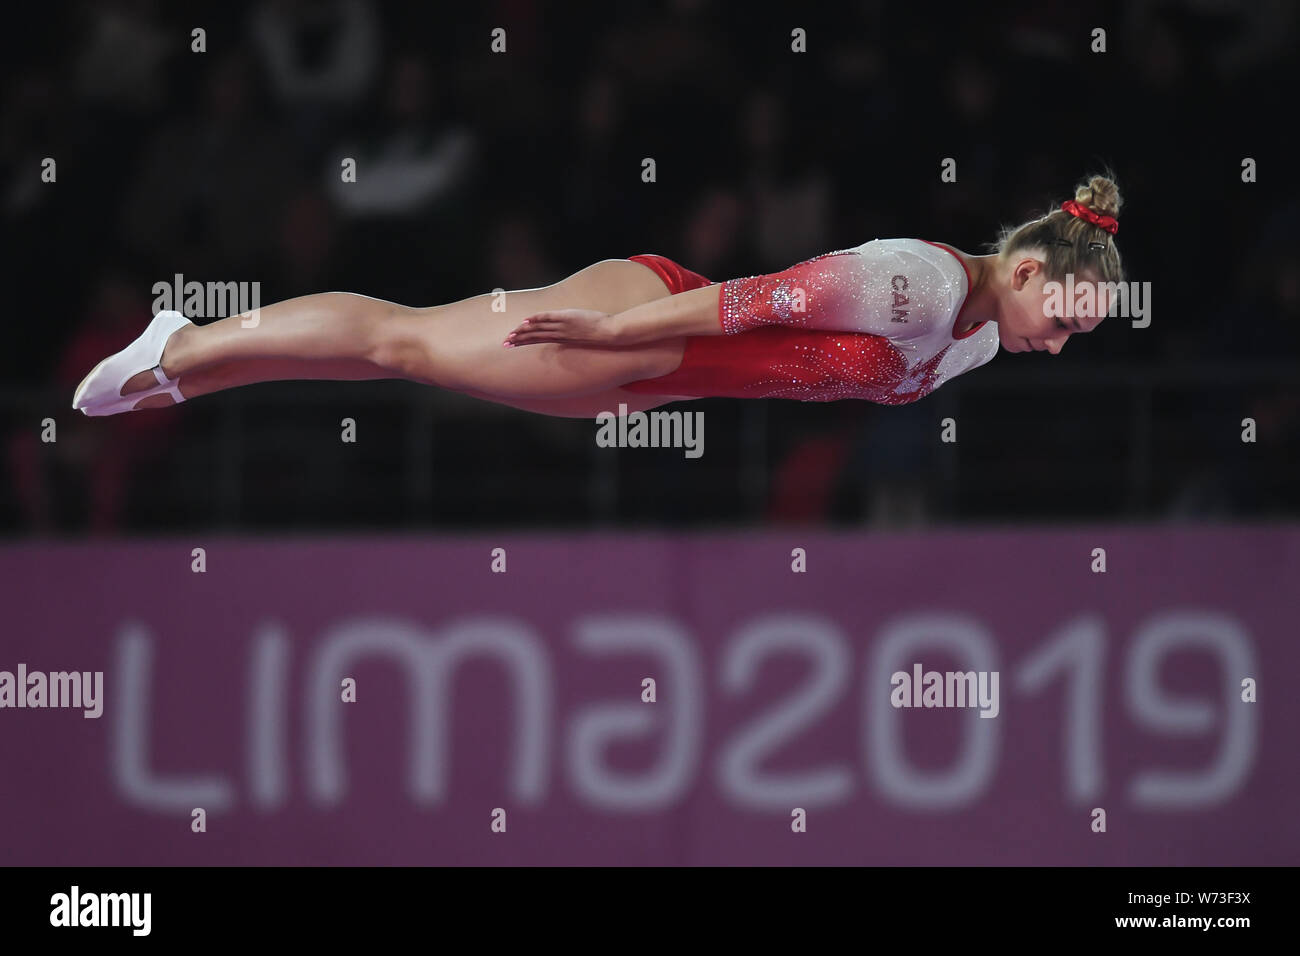 Lima, Peru. 4th Aug, 2019. SARAH MILETTE from Canada flips in a layed out position during the competition held in the Polideportivo Villa El Salvador in Lima, Peru. Credit: Amy Sanderson/ZUMA Wire/Alamy Live News Stock Photo